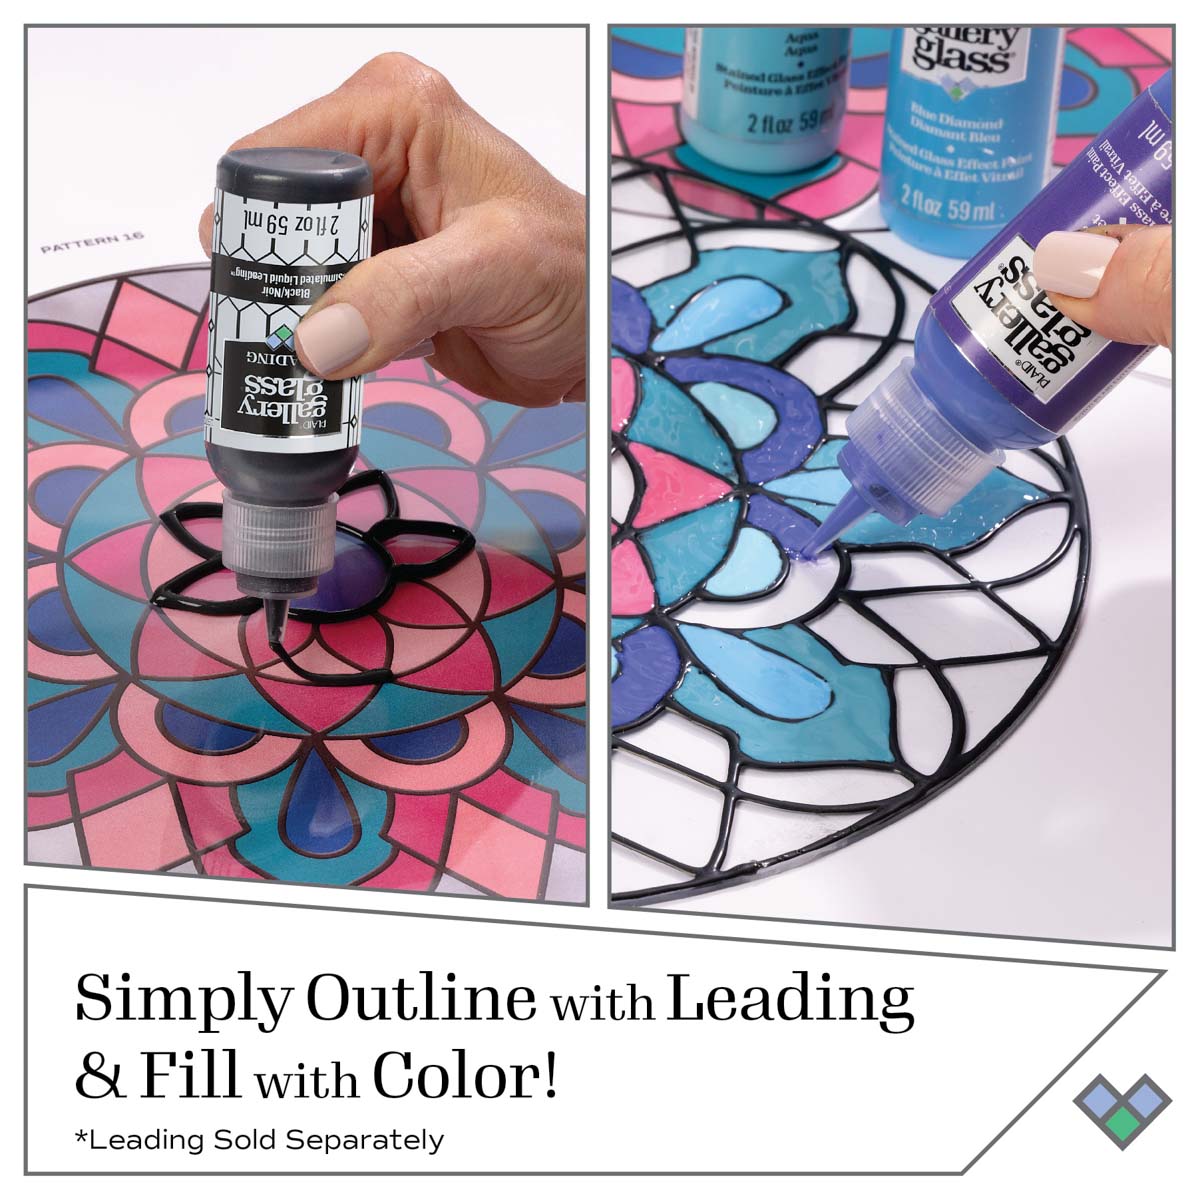 Gallery Glass ® Stained Glass Effect Paint - Blue Diamond, 2 oz. - 19776